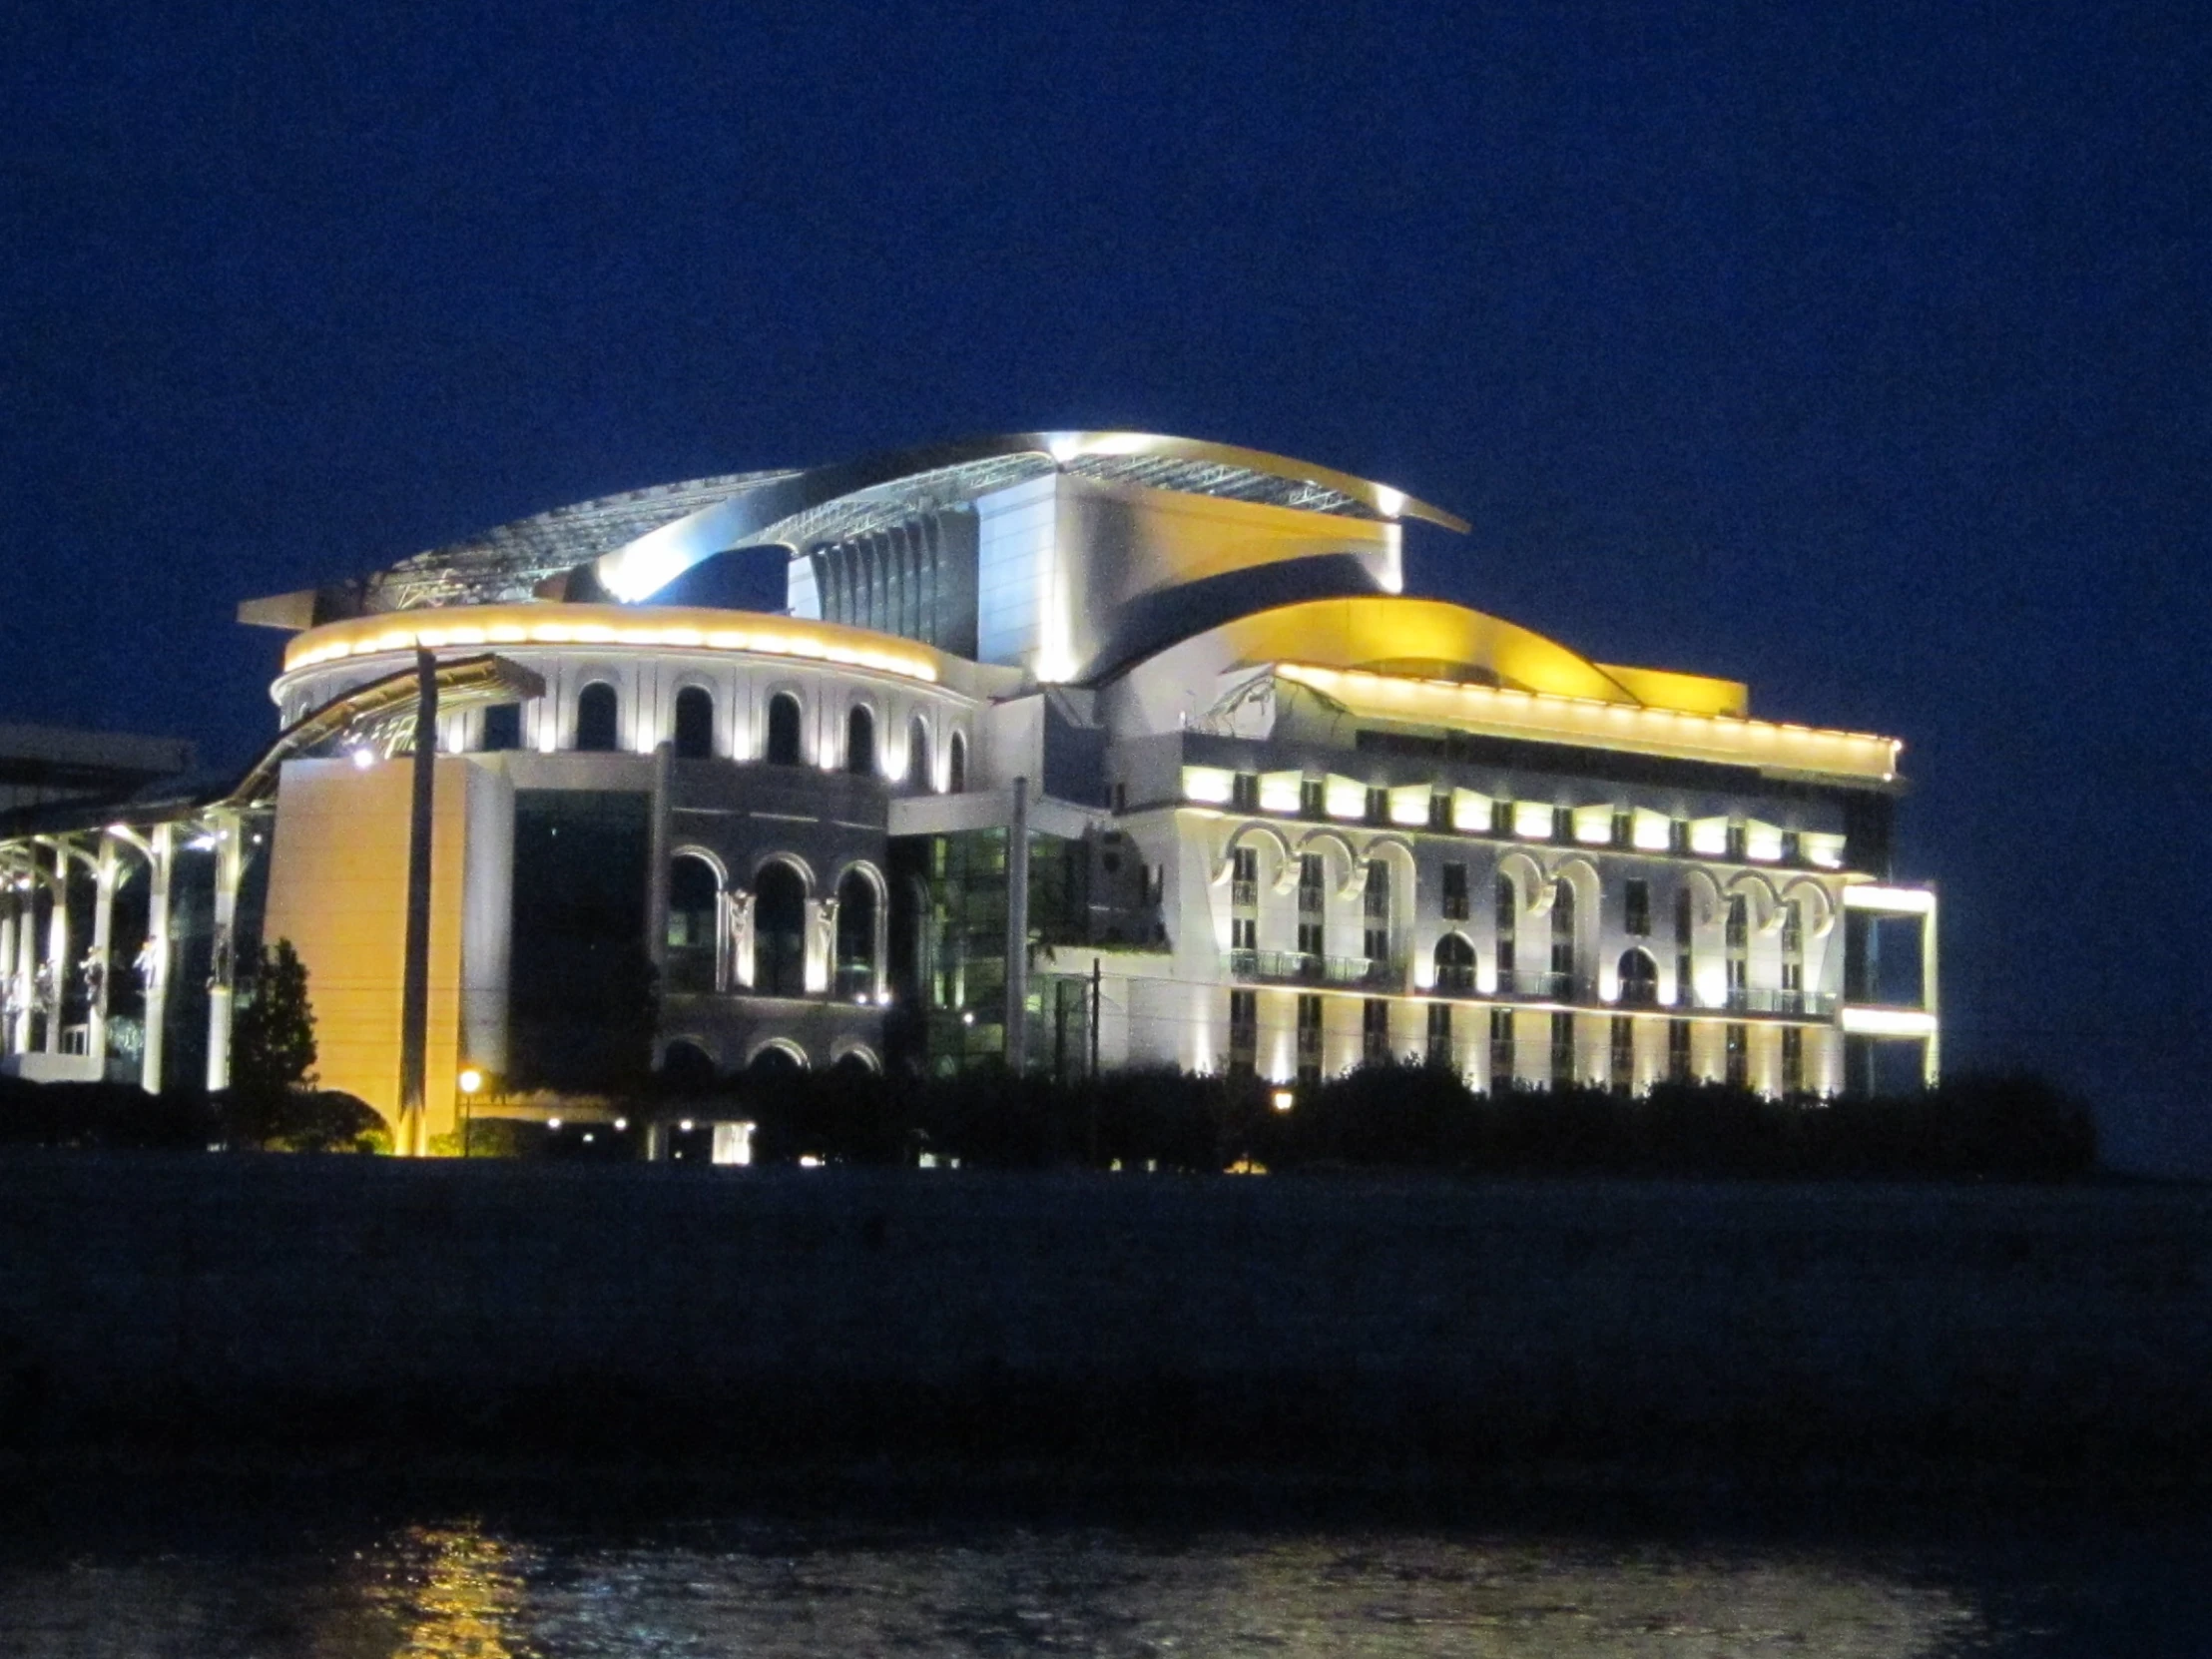 an exterior view of a large building lit up at night